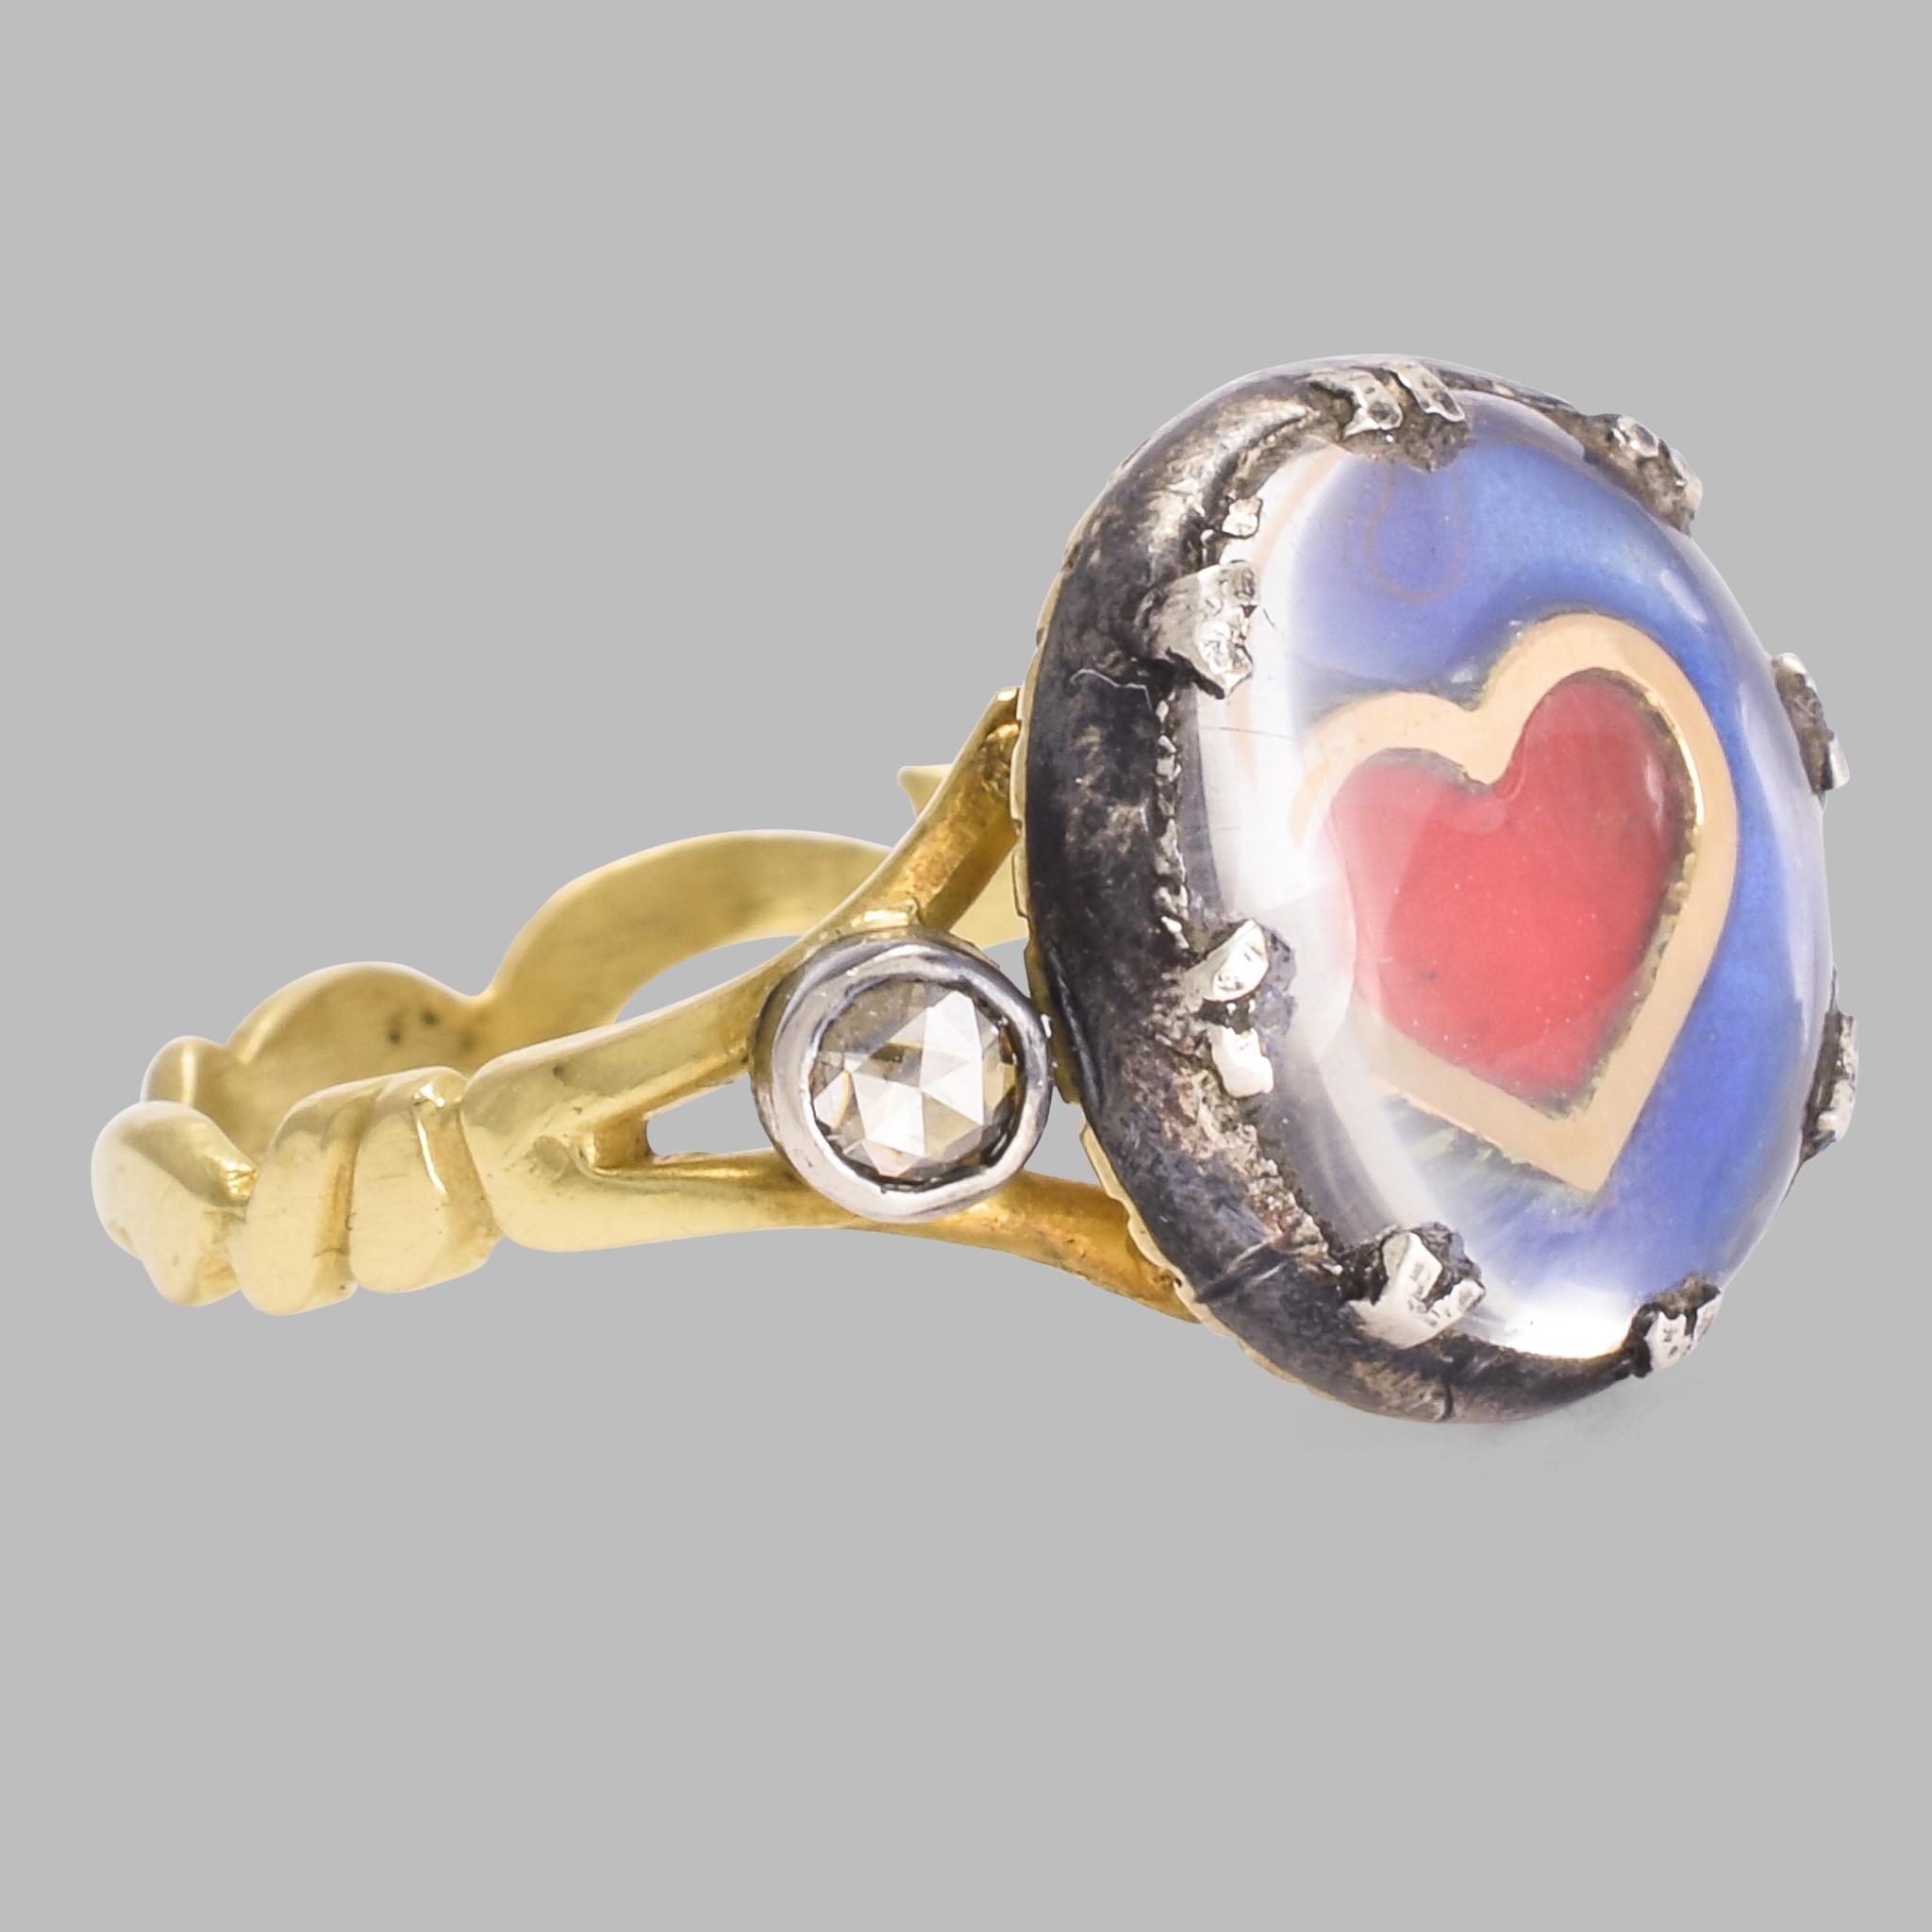 BL Bespoke Collection

Enduring Love. The blood-red heart floats on a sea of blue... suspended, timeless, within a crystal dome.

This ring epitomises the idea of enduring love. The diamonds represent endurance, as they are the hardest known